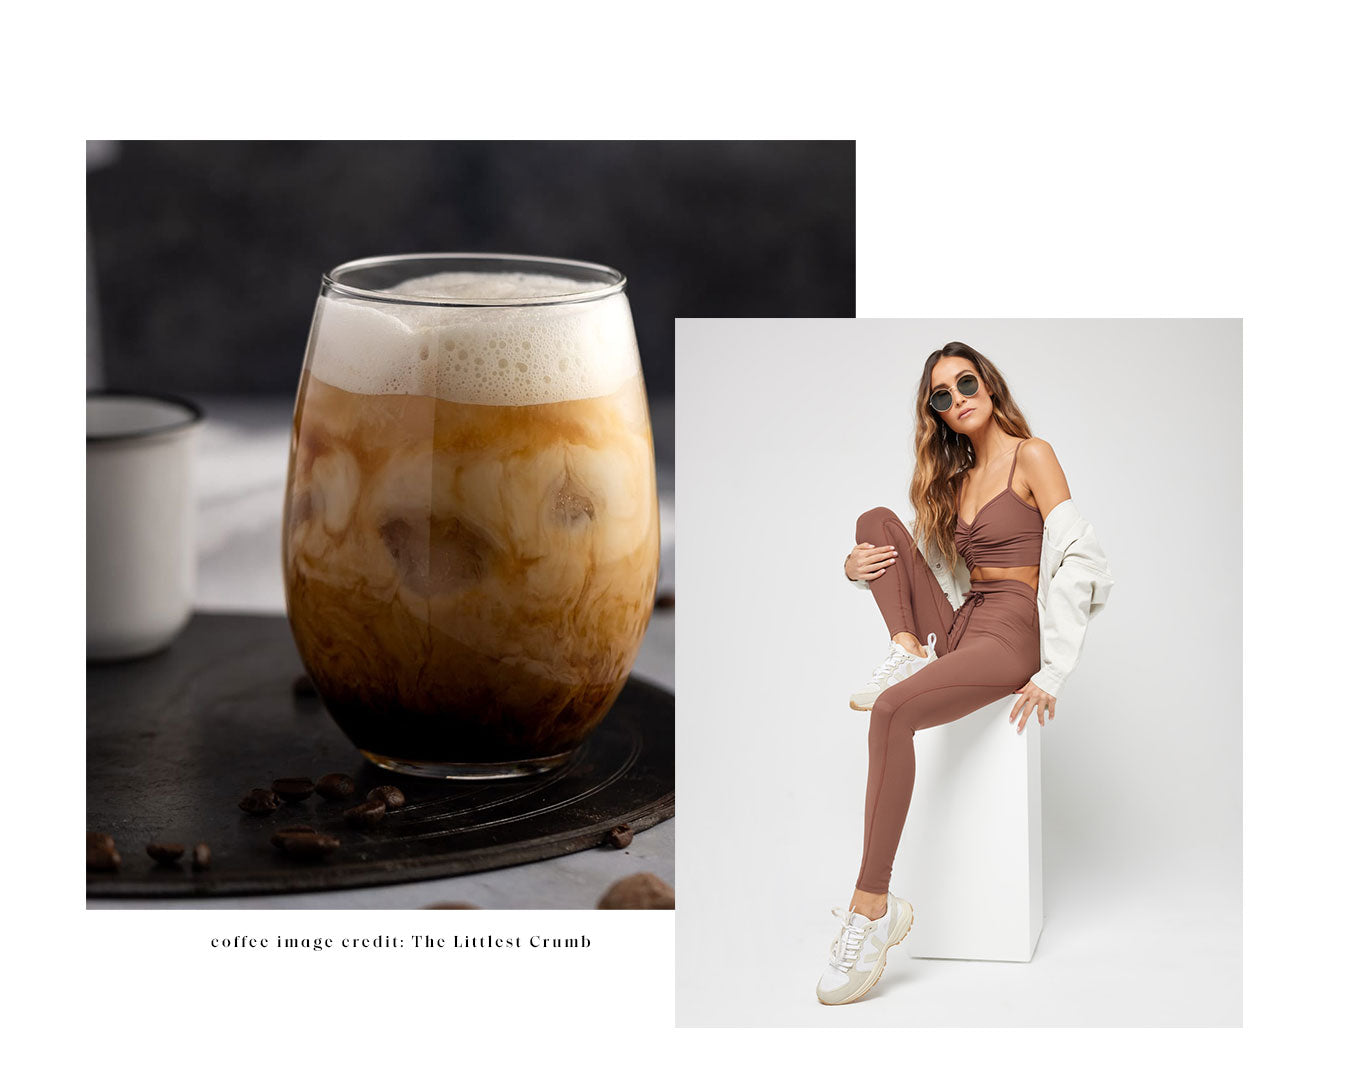 matching coffee order to active outfit